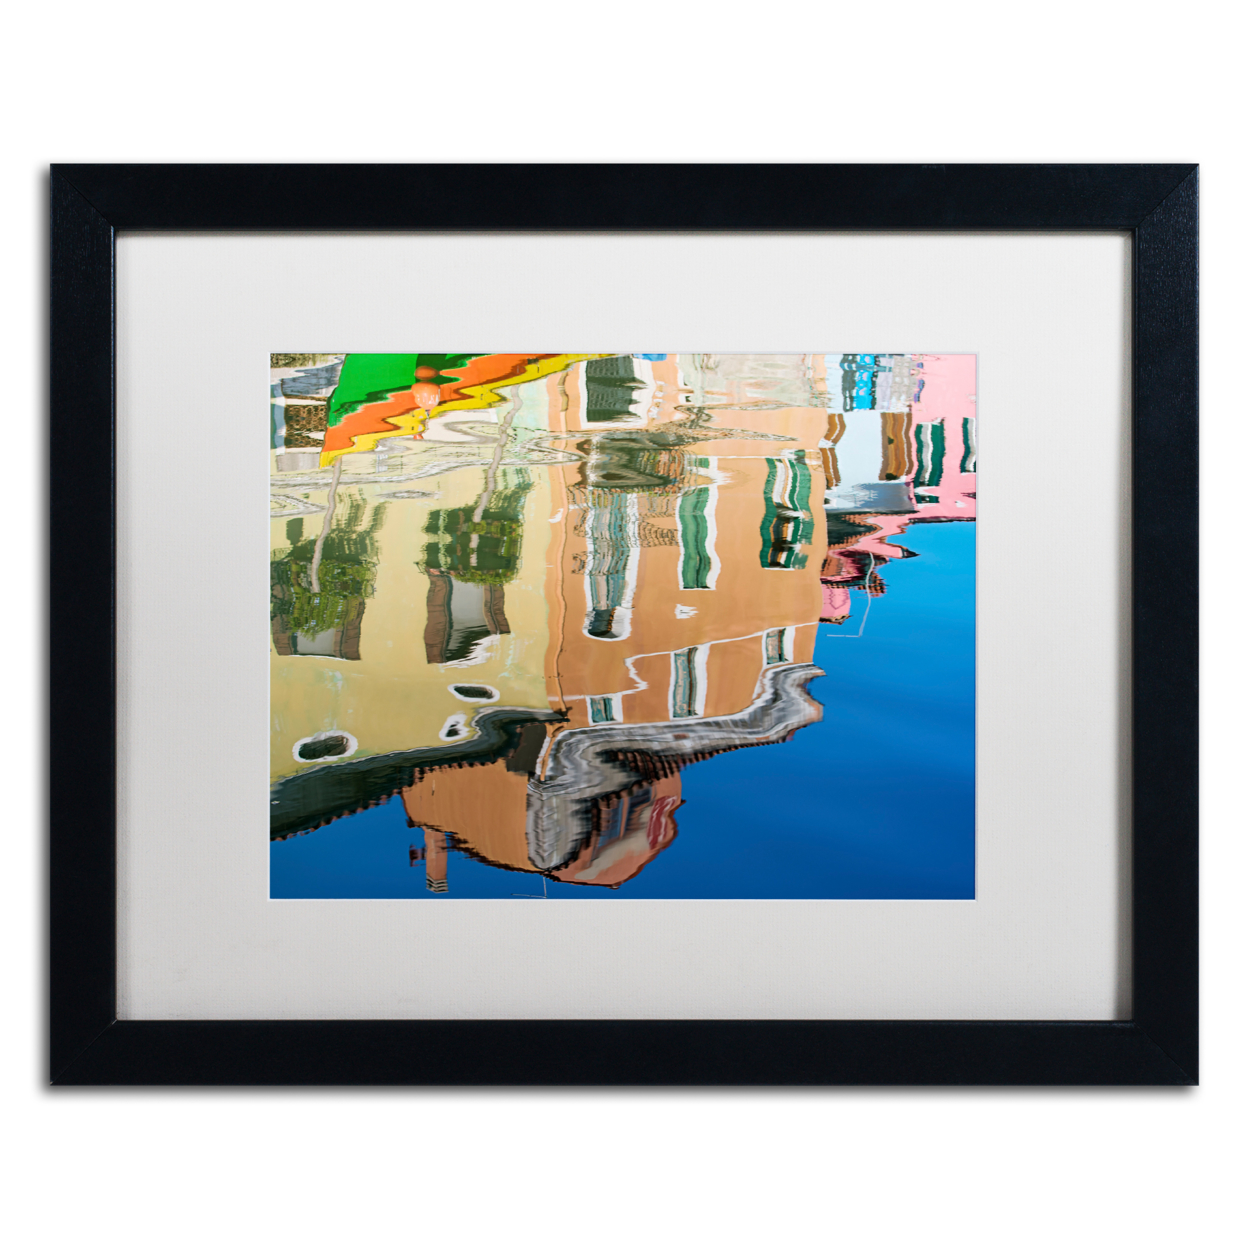 Michael Blanchette Photography 'Canal Reflection' Black Wooden Framed Art 18 X 22 Inches